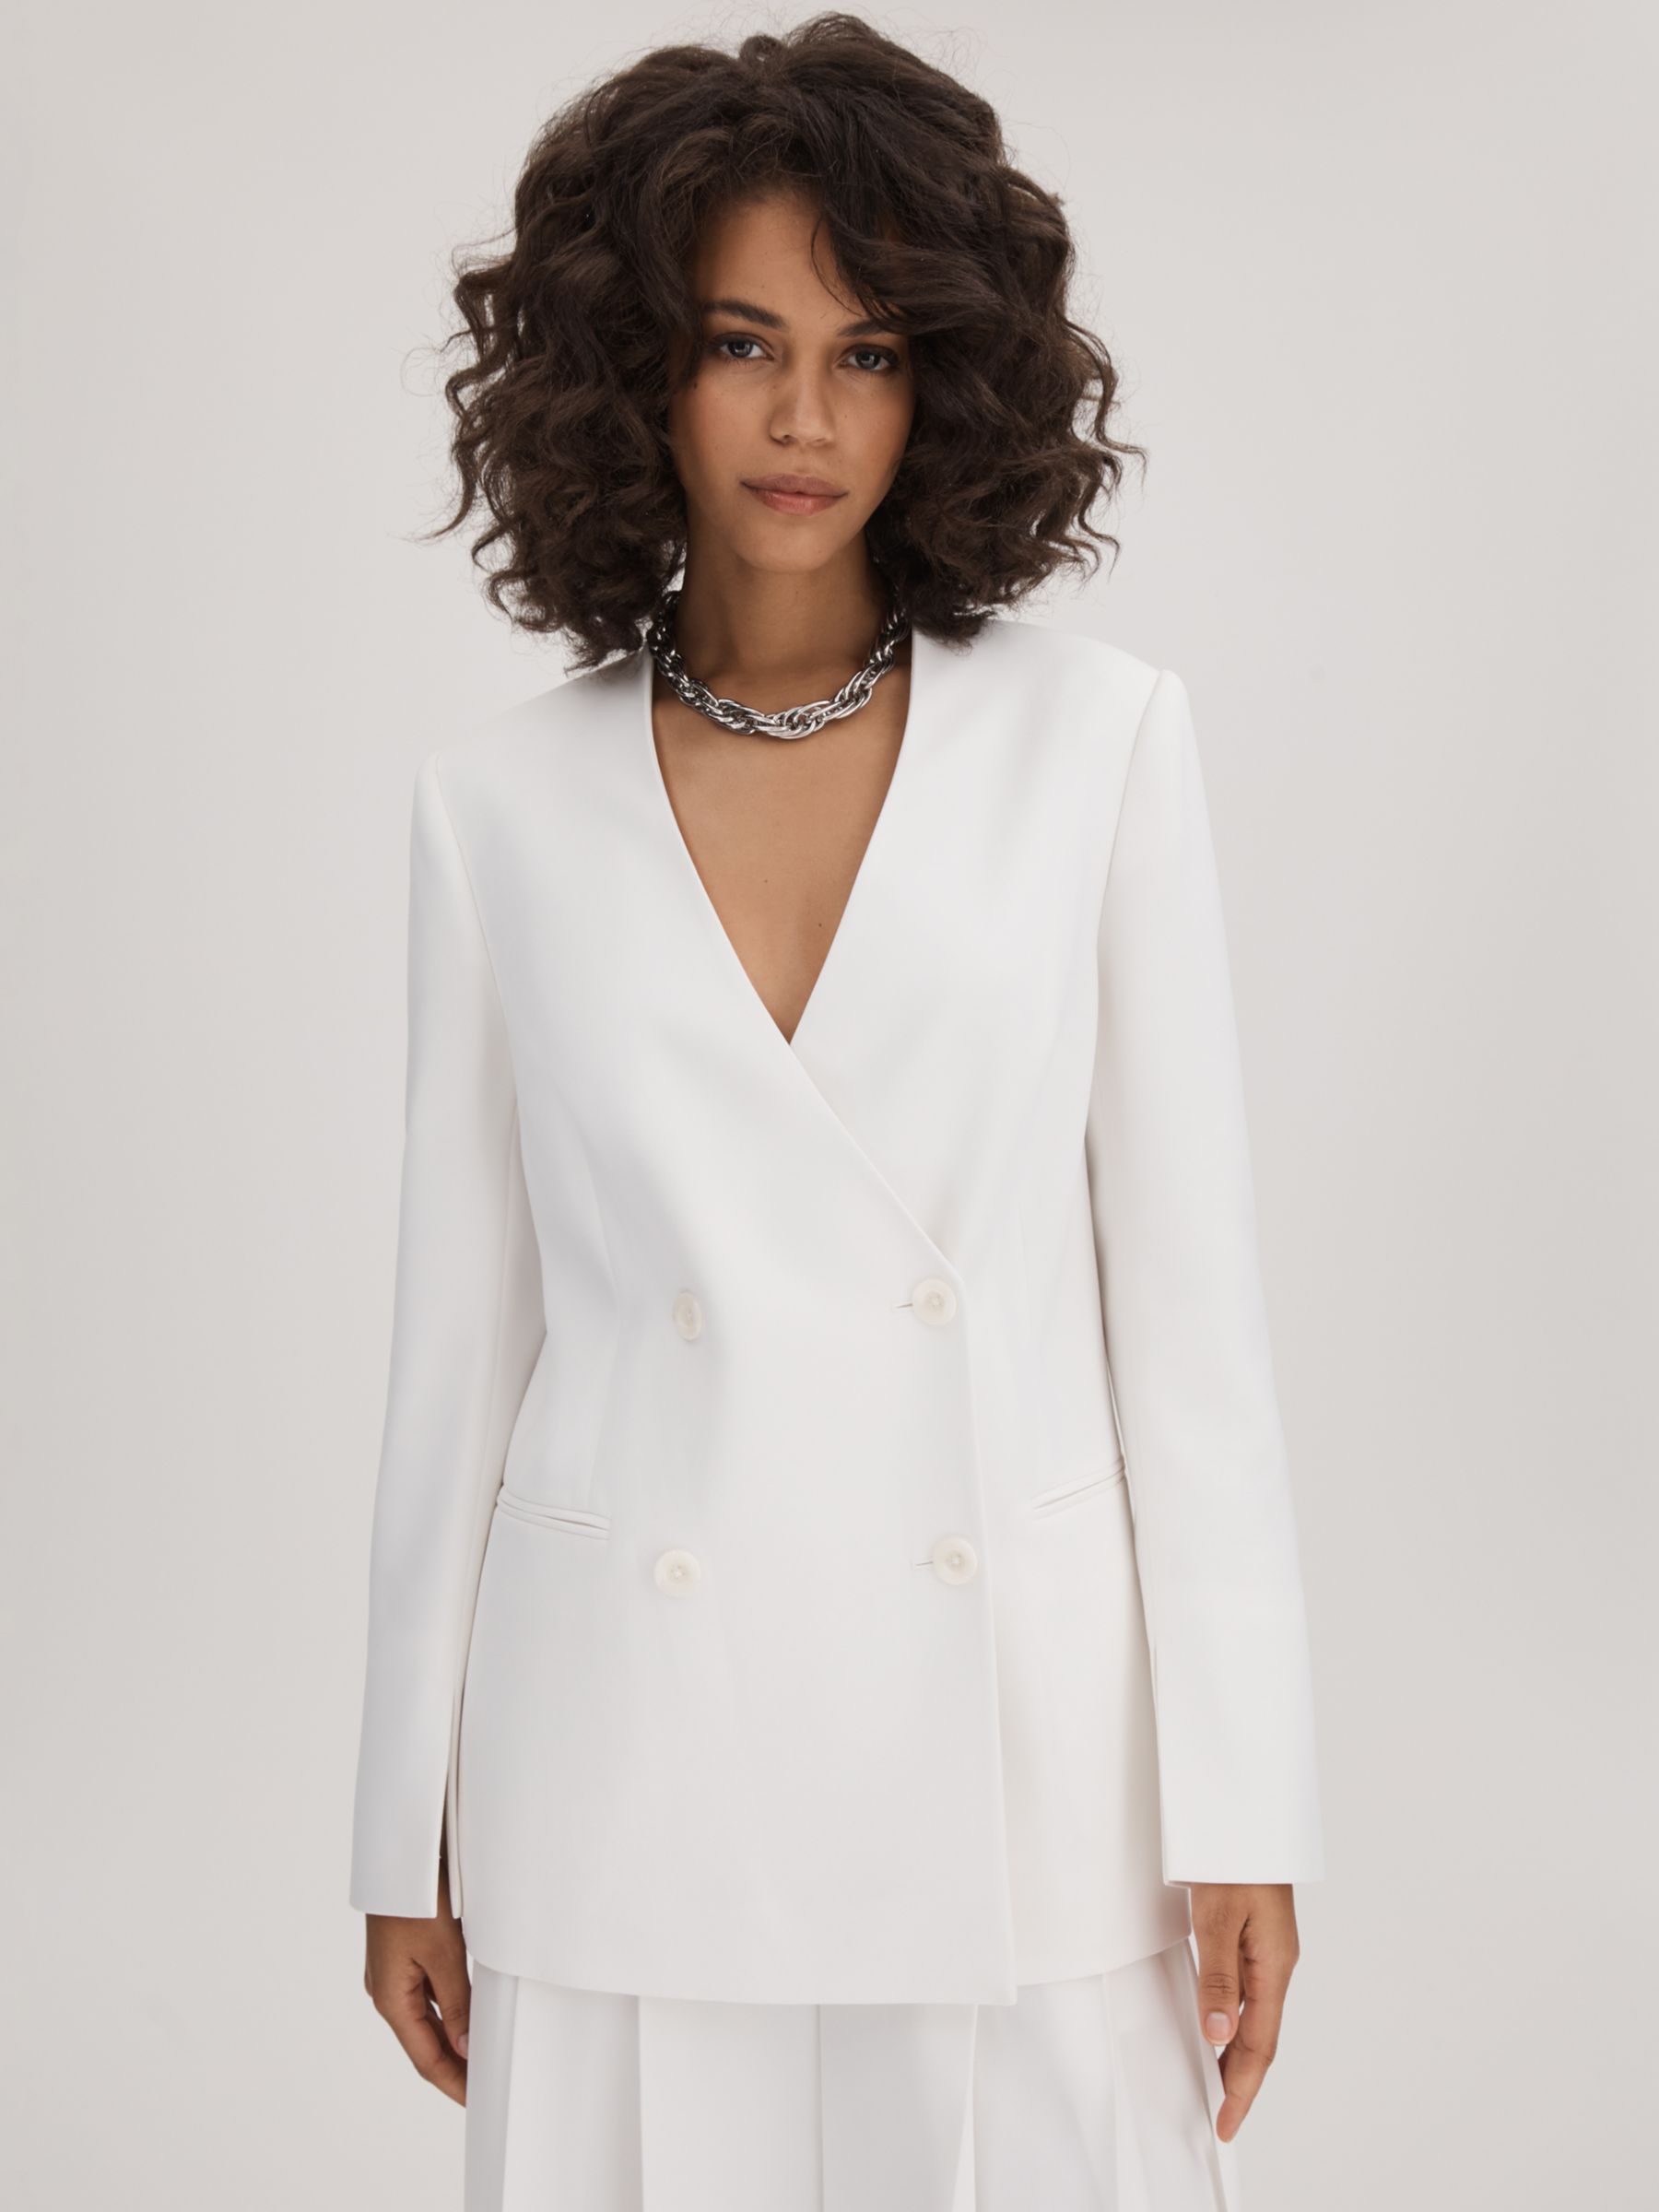 FLORERE Collarless Double Breasted Blazer, Ivory at John Lewis & Partners